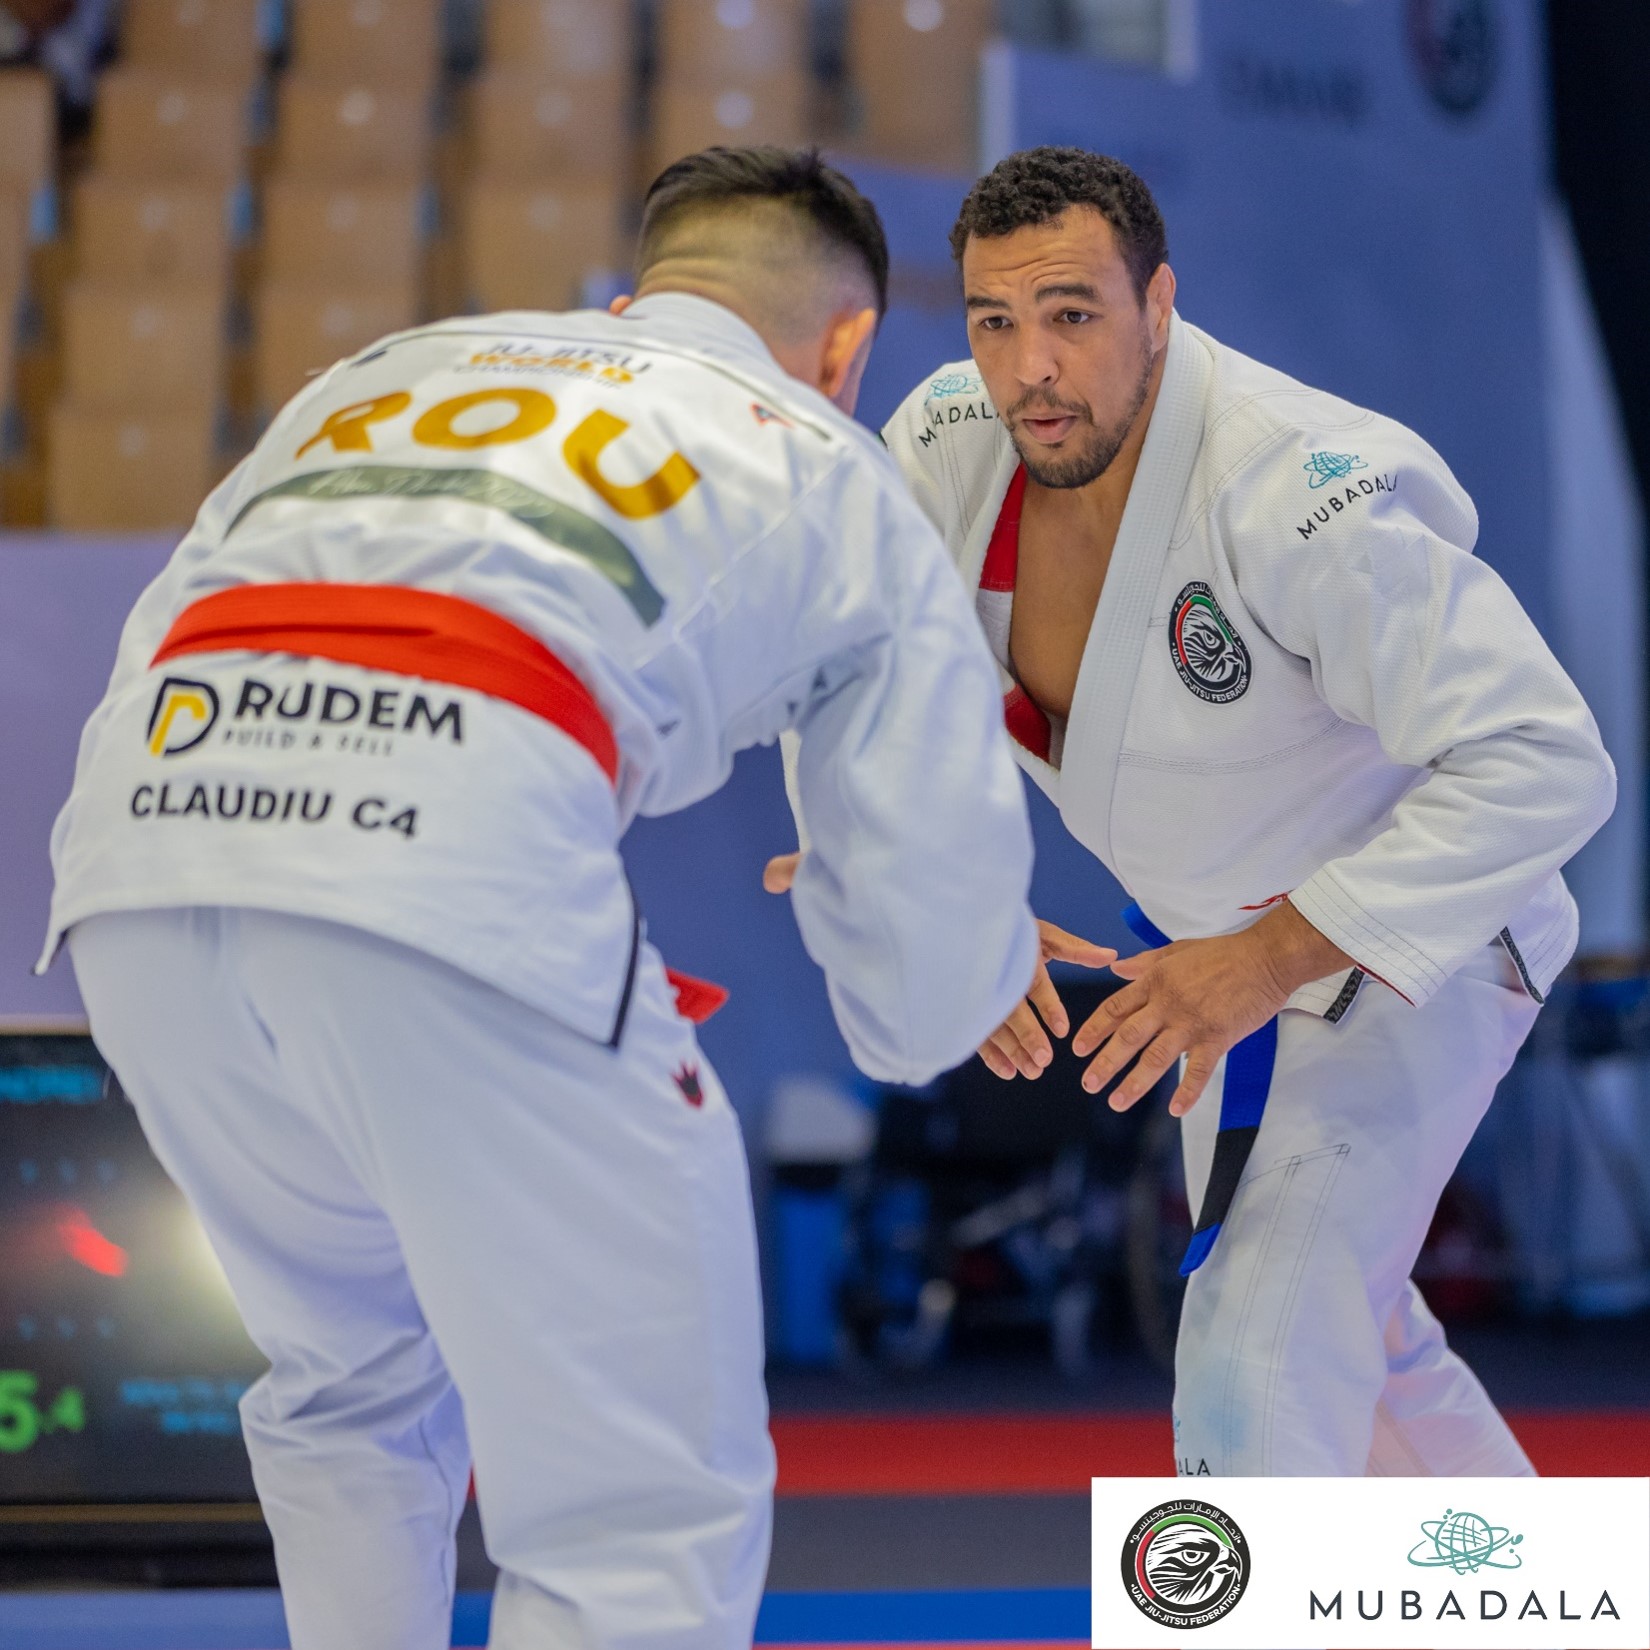 WORKING TOGETHER TO NURTURE CHAMPIONS AND EMPOWER YOUTH: UAEJJF AND MUBADALA LEAD BY EXAMPLE